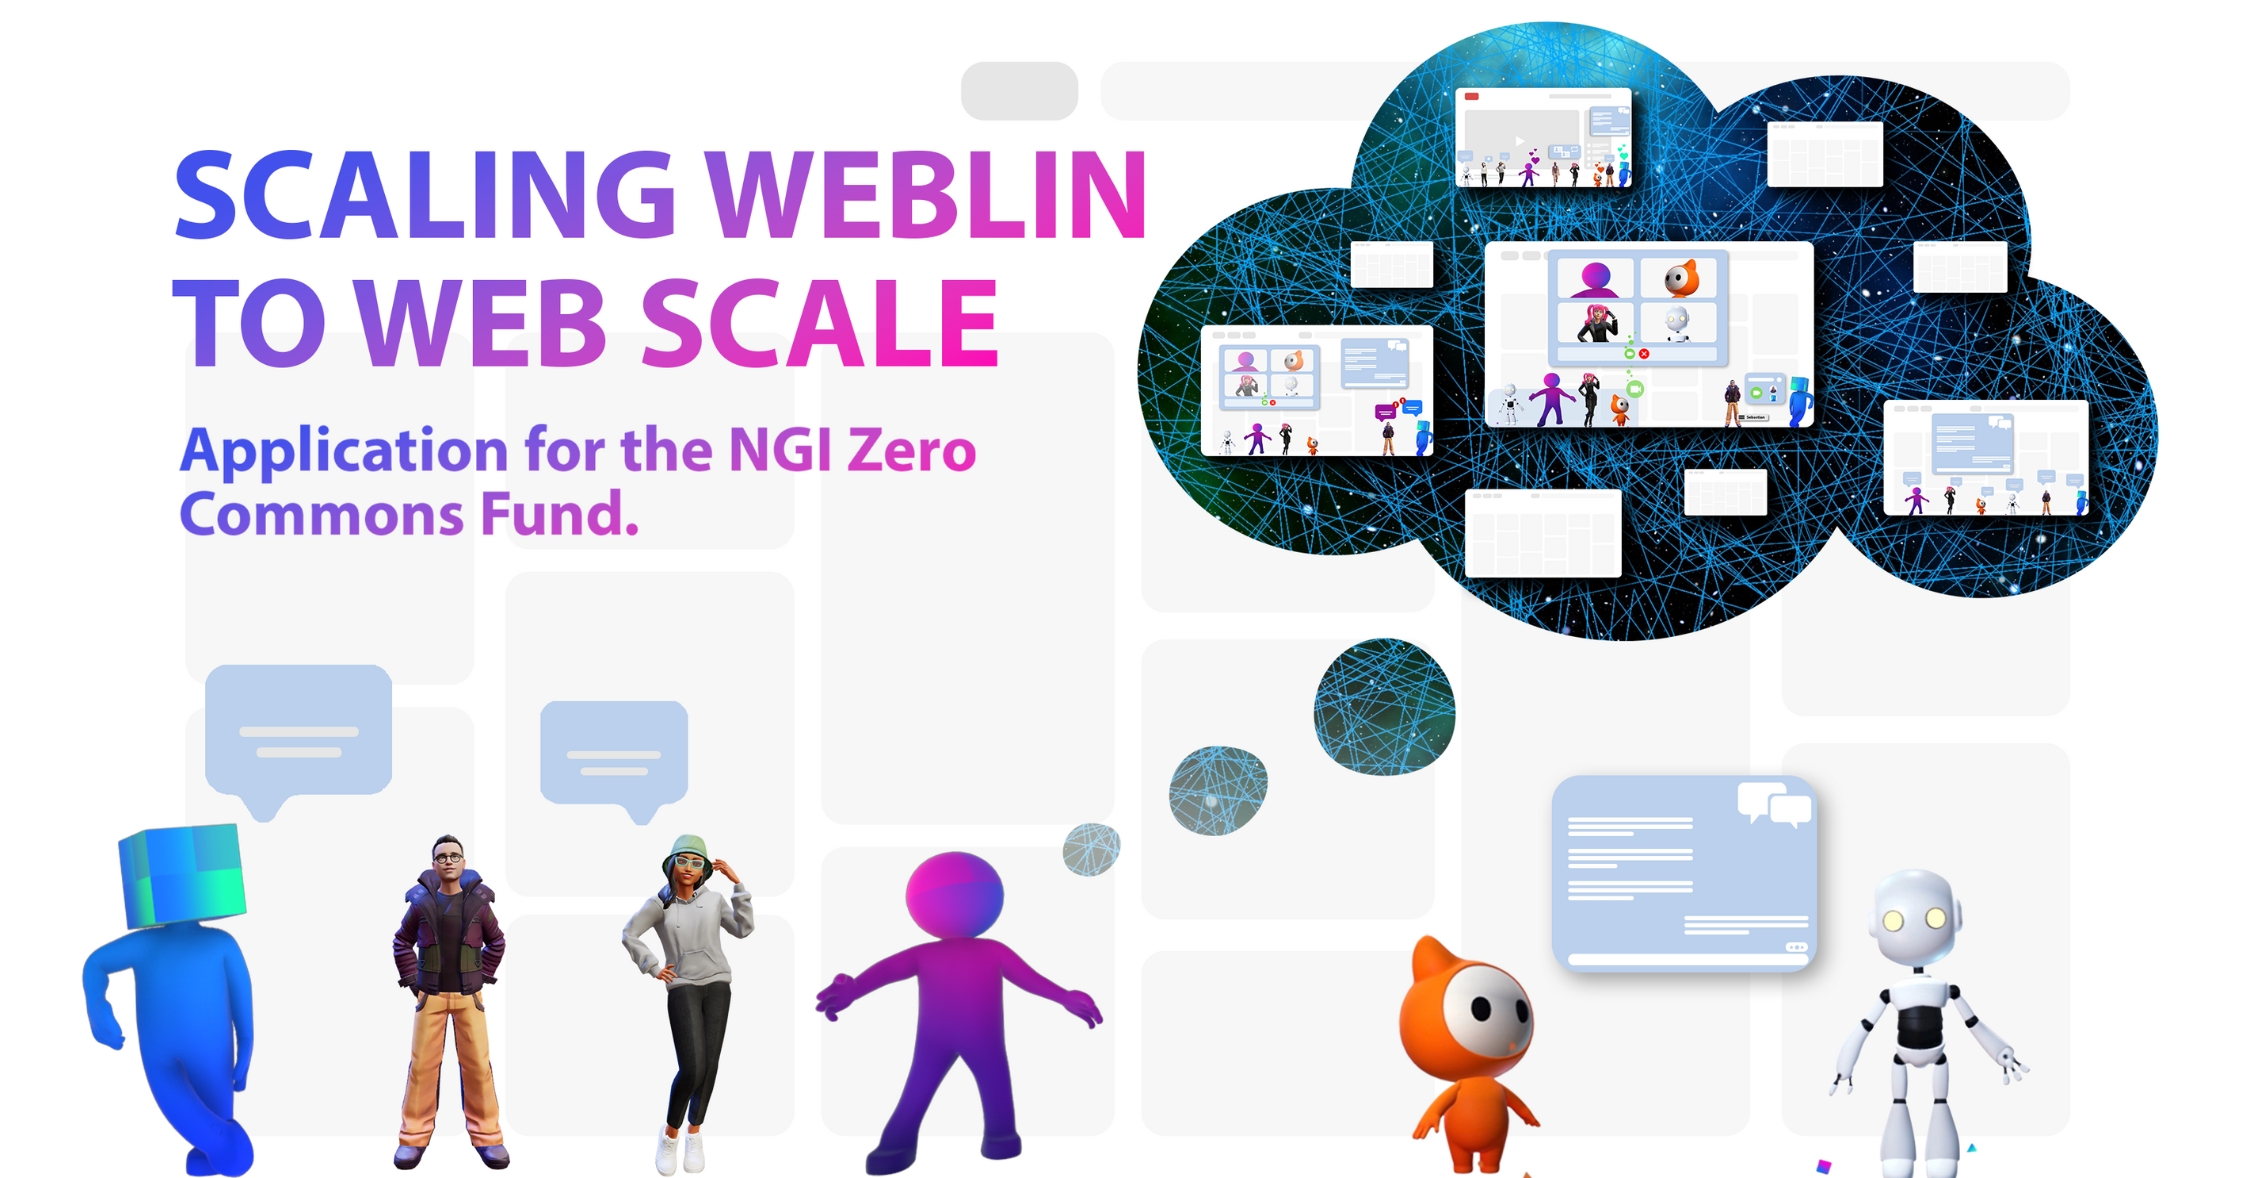 Scaling Weblin to Web Scale: Application for the NGI Zero Commons Fund